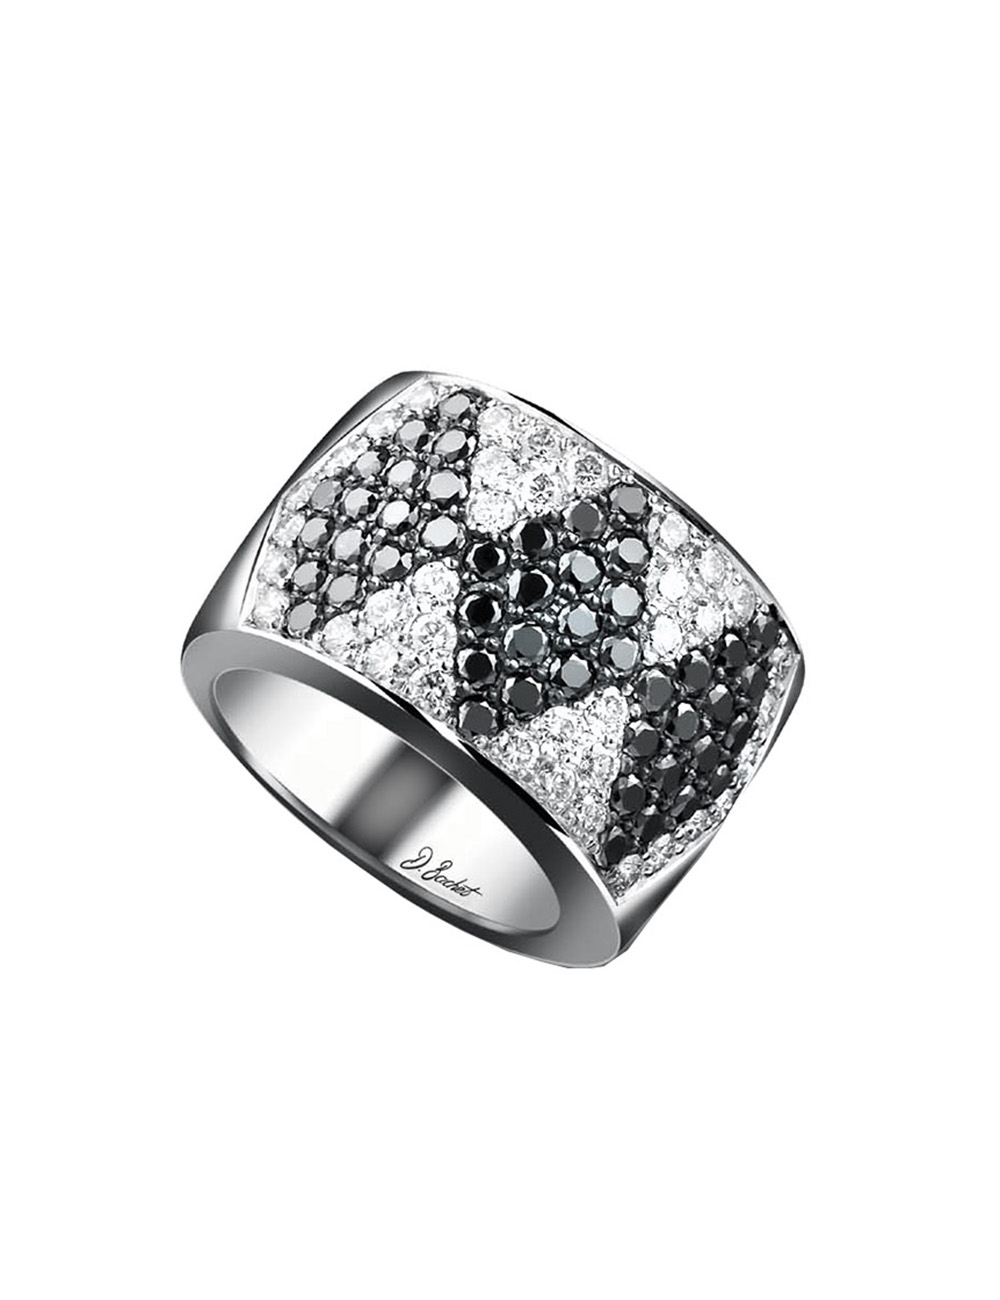 Luxury ring for men with a wide band in platinum, in platinum black diamonds and white diamonds